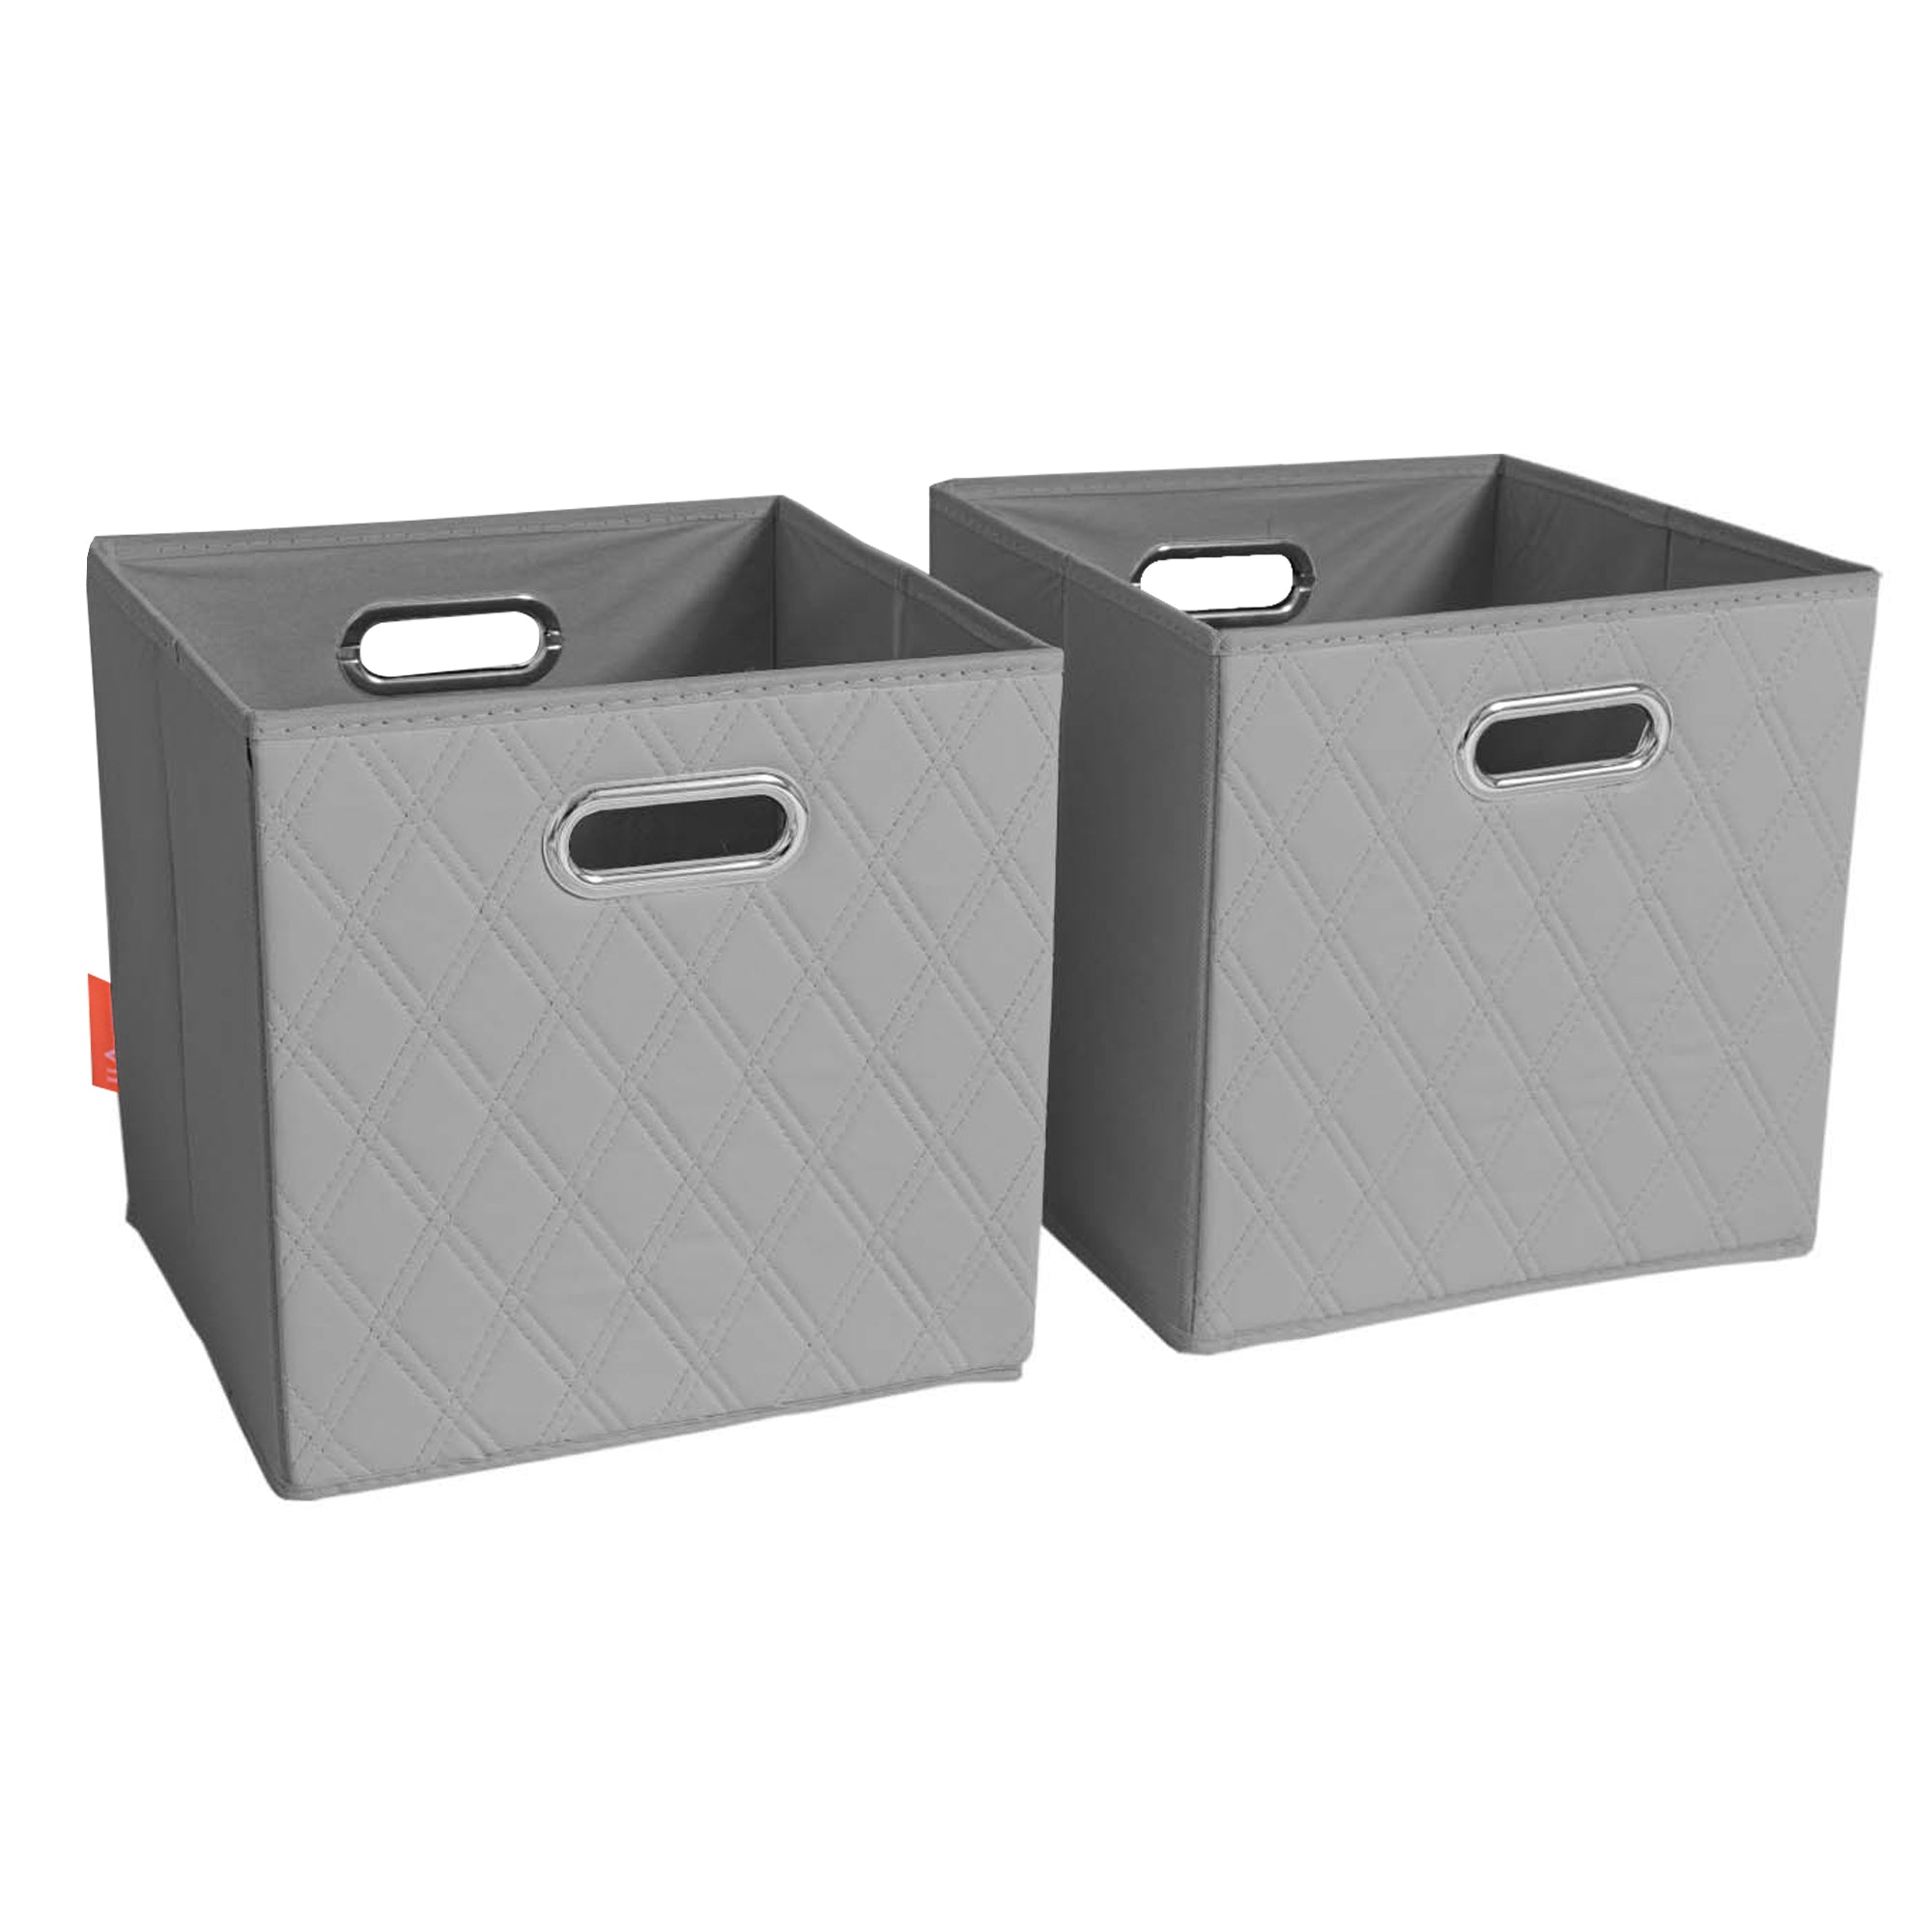 JIAessentials 12 inch Foldable Diamond Patterned Faux Leather Storage Cube Bins Set of Two with Dual Handles - 12" Gray